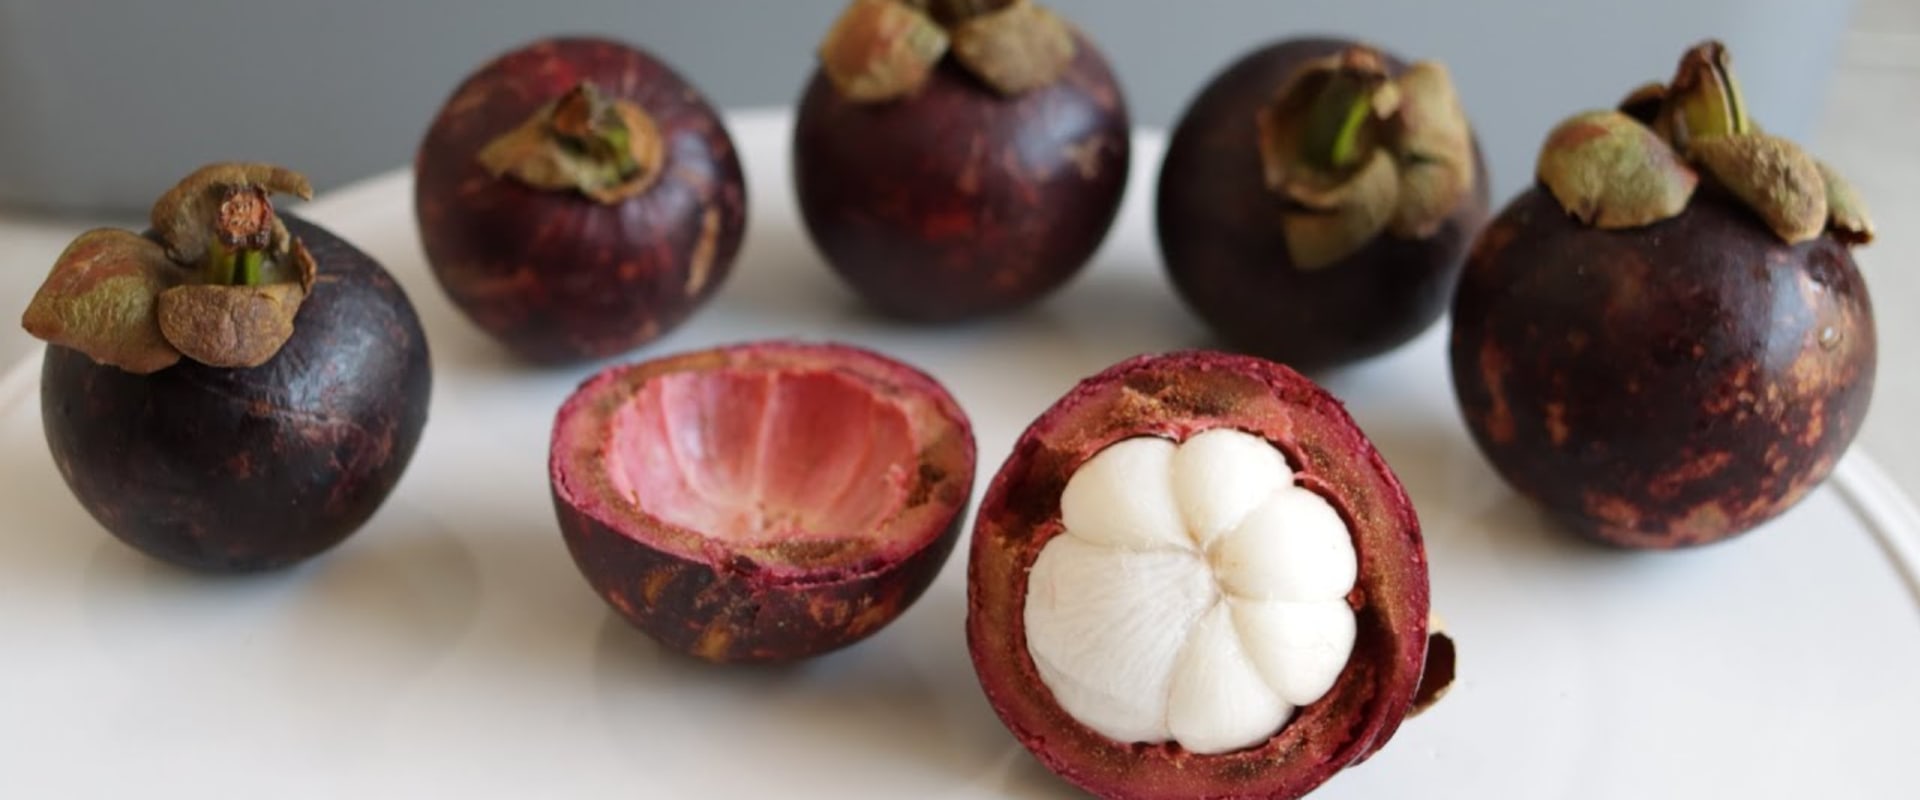 How many mangosteen can you eat in a day?